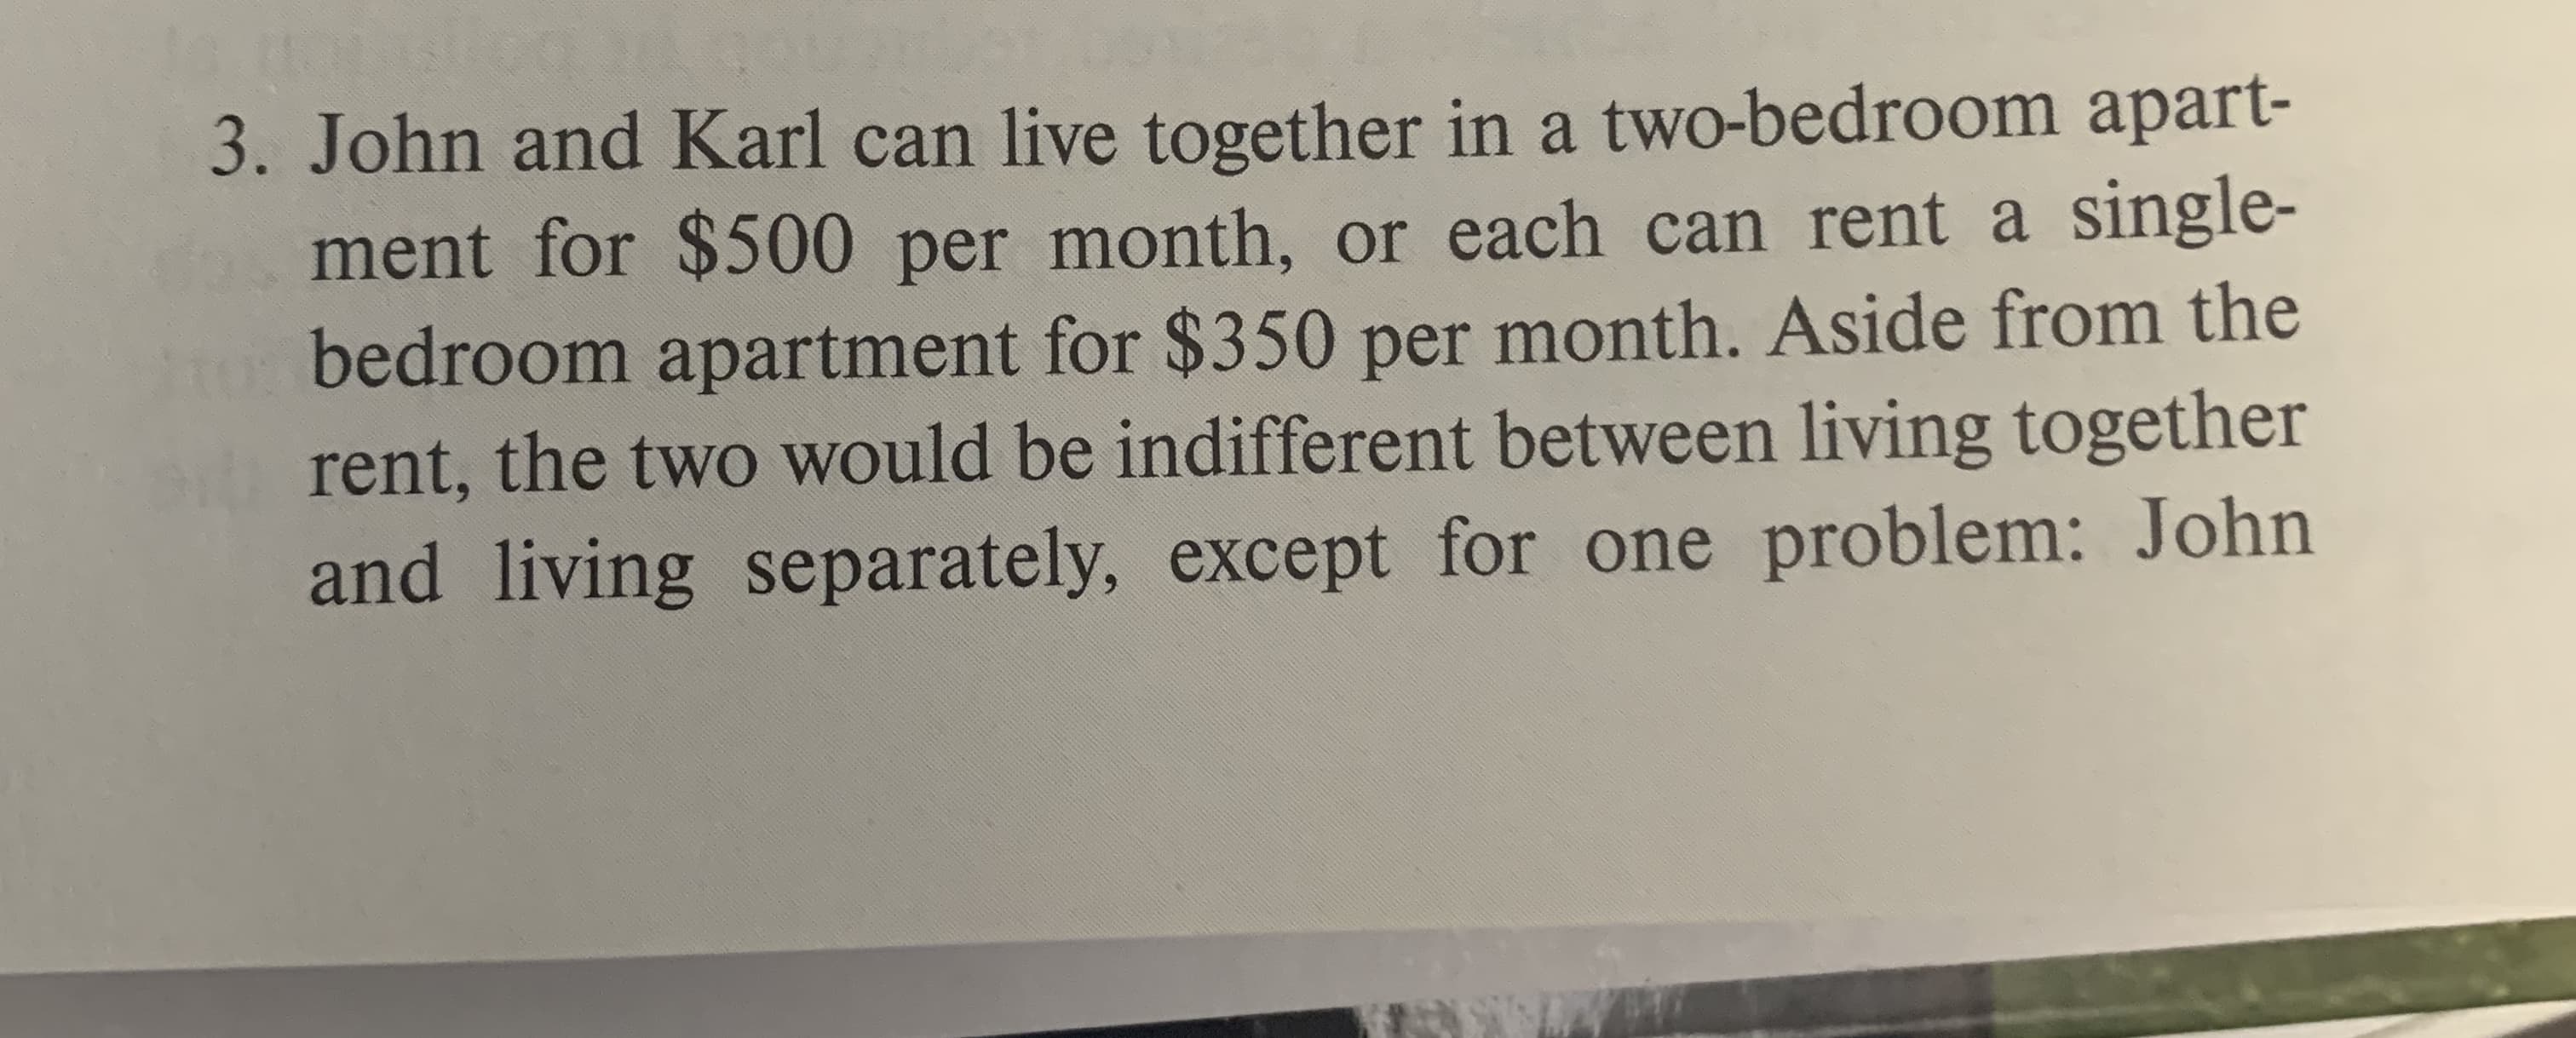 3. John and Karl can live together in a two-bedroom apart-
ment for $500 per month, or each can rent a single-
bedroom apartment for $350 per month. Aside from the
rent, the two would be indifferent between living together
and living separately, except for one problem: John
